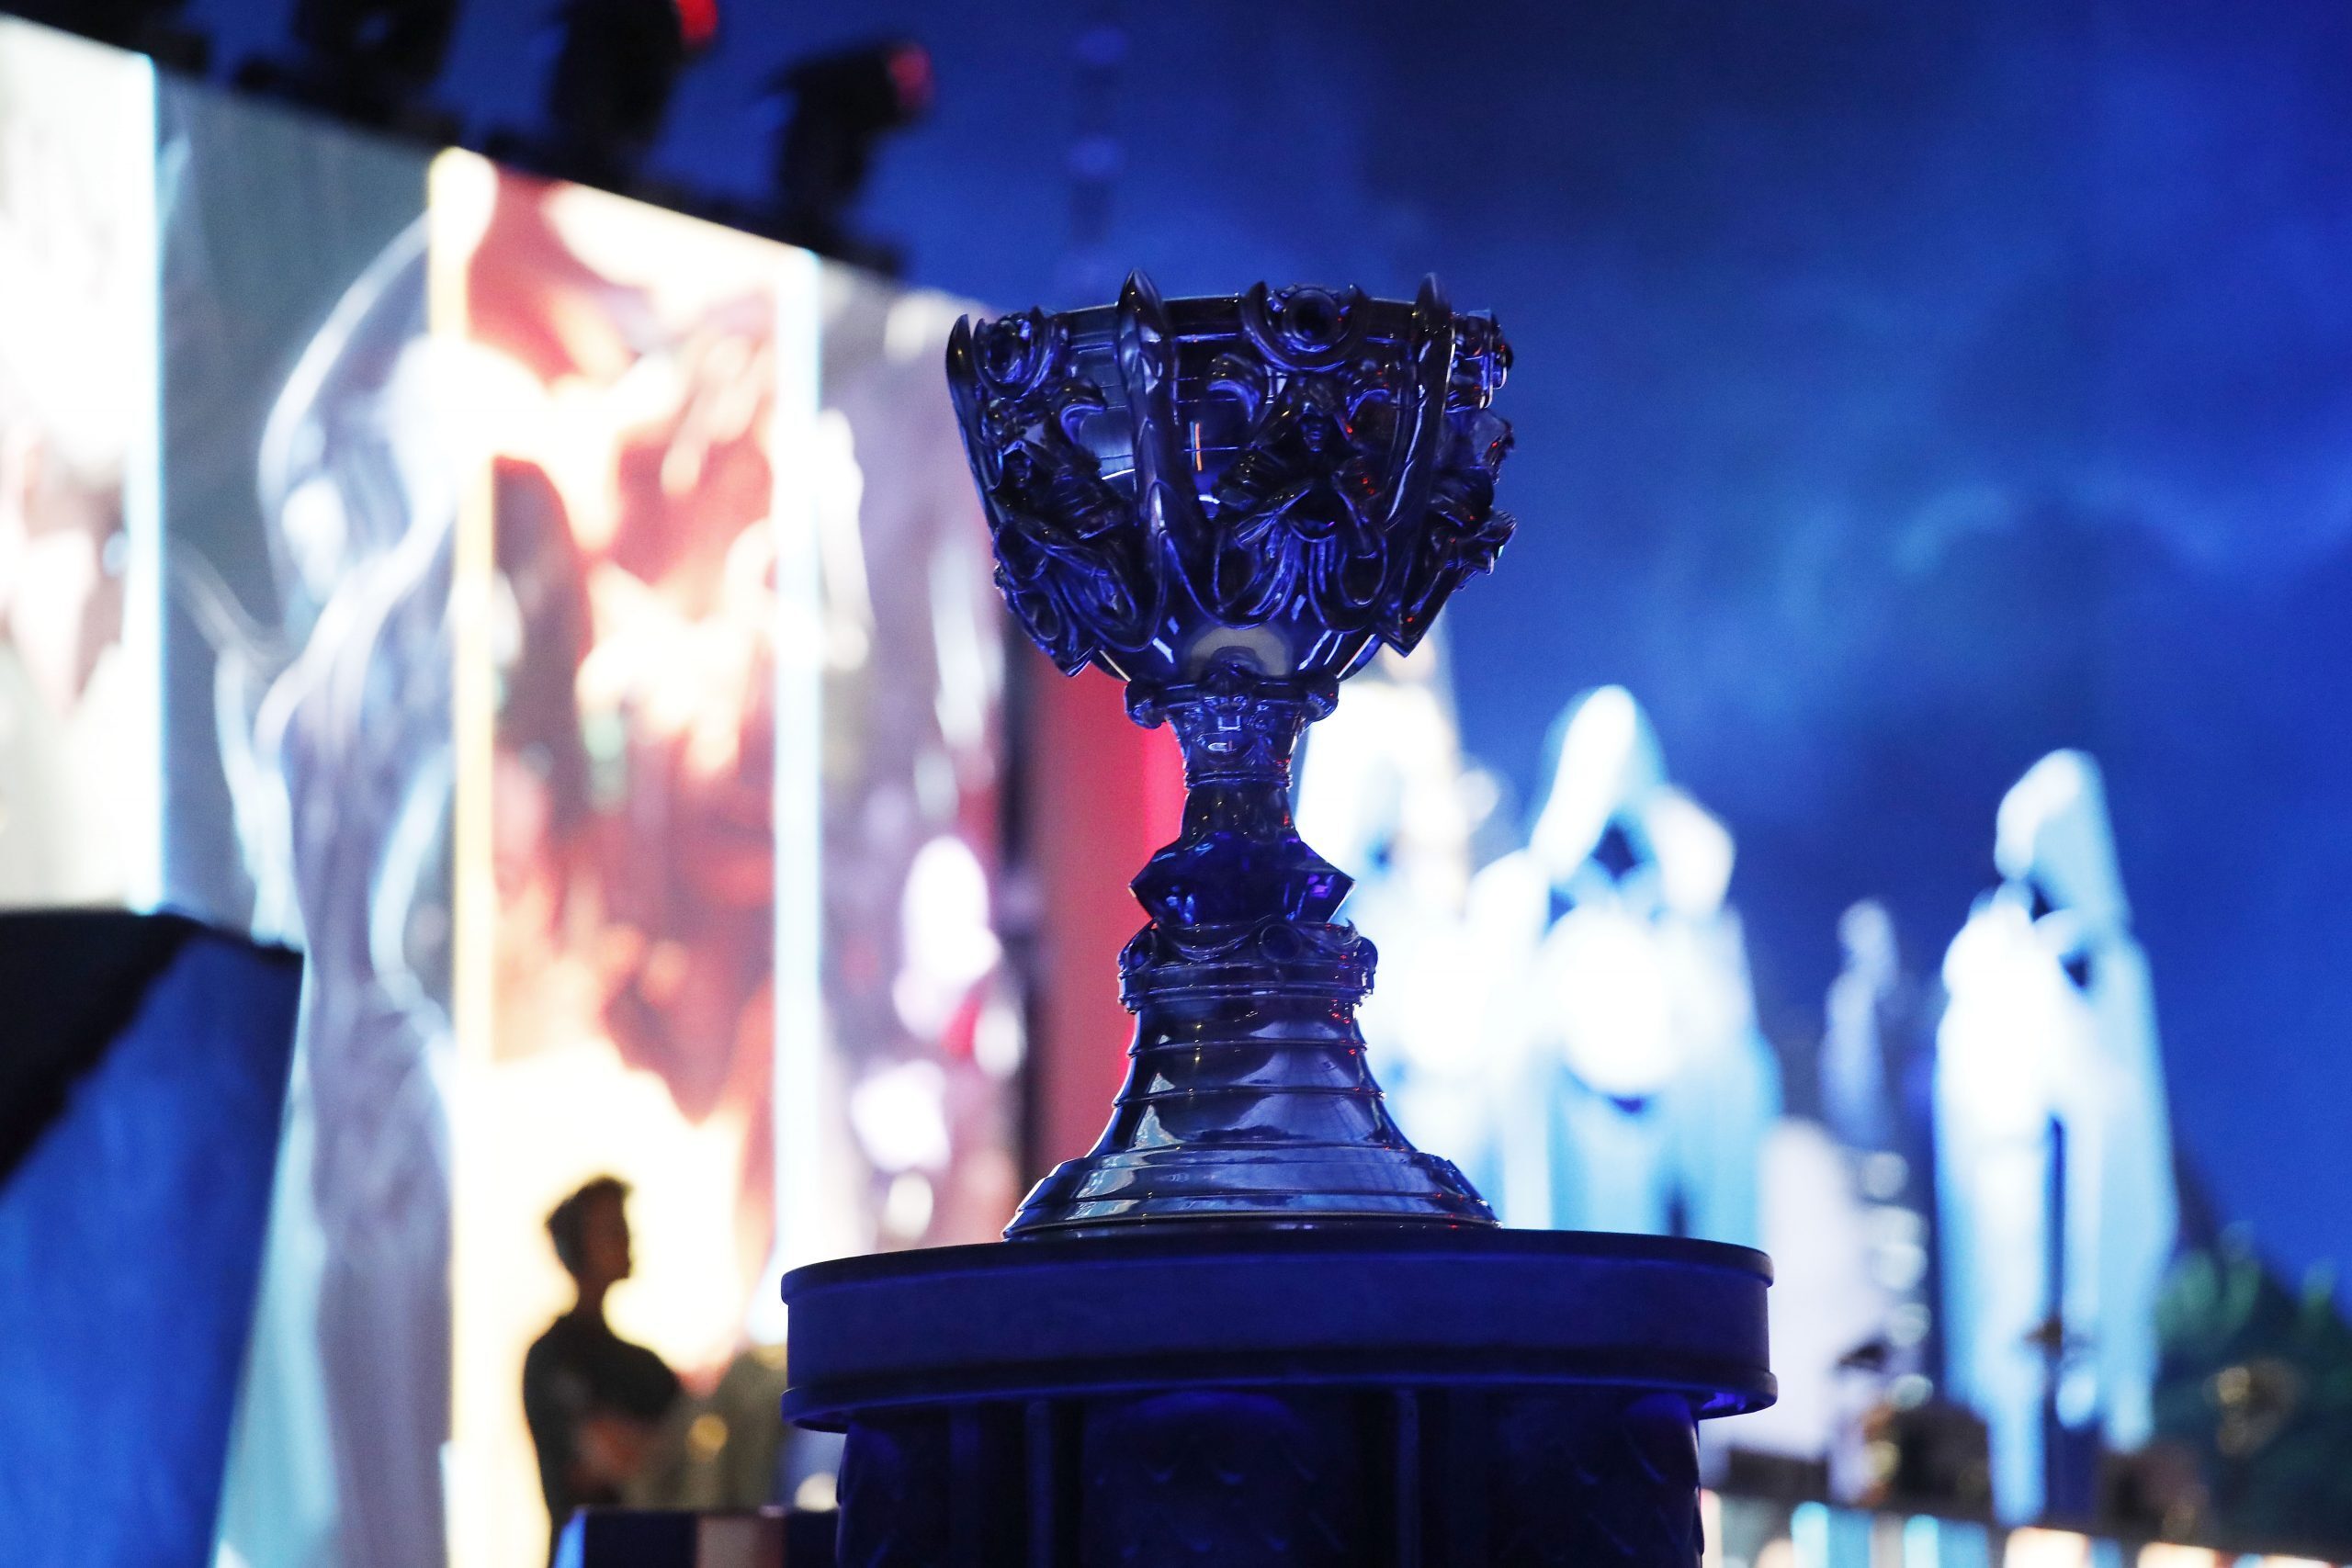 The 2019 League of Legends World Championship Finals will be held in Paris, France. (Photo by Woohae Cho/Getty Images)